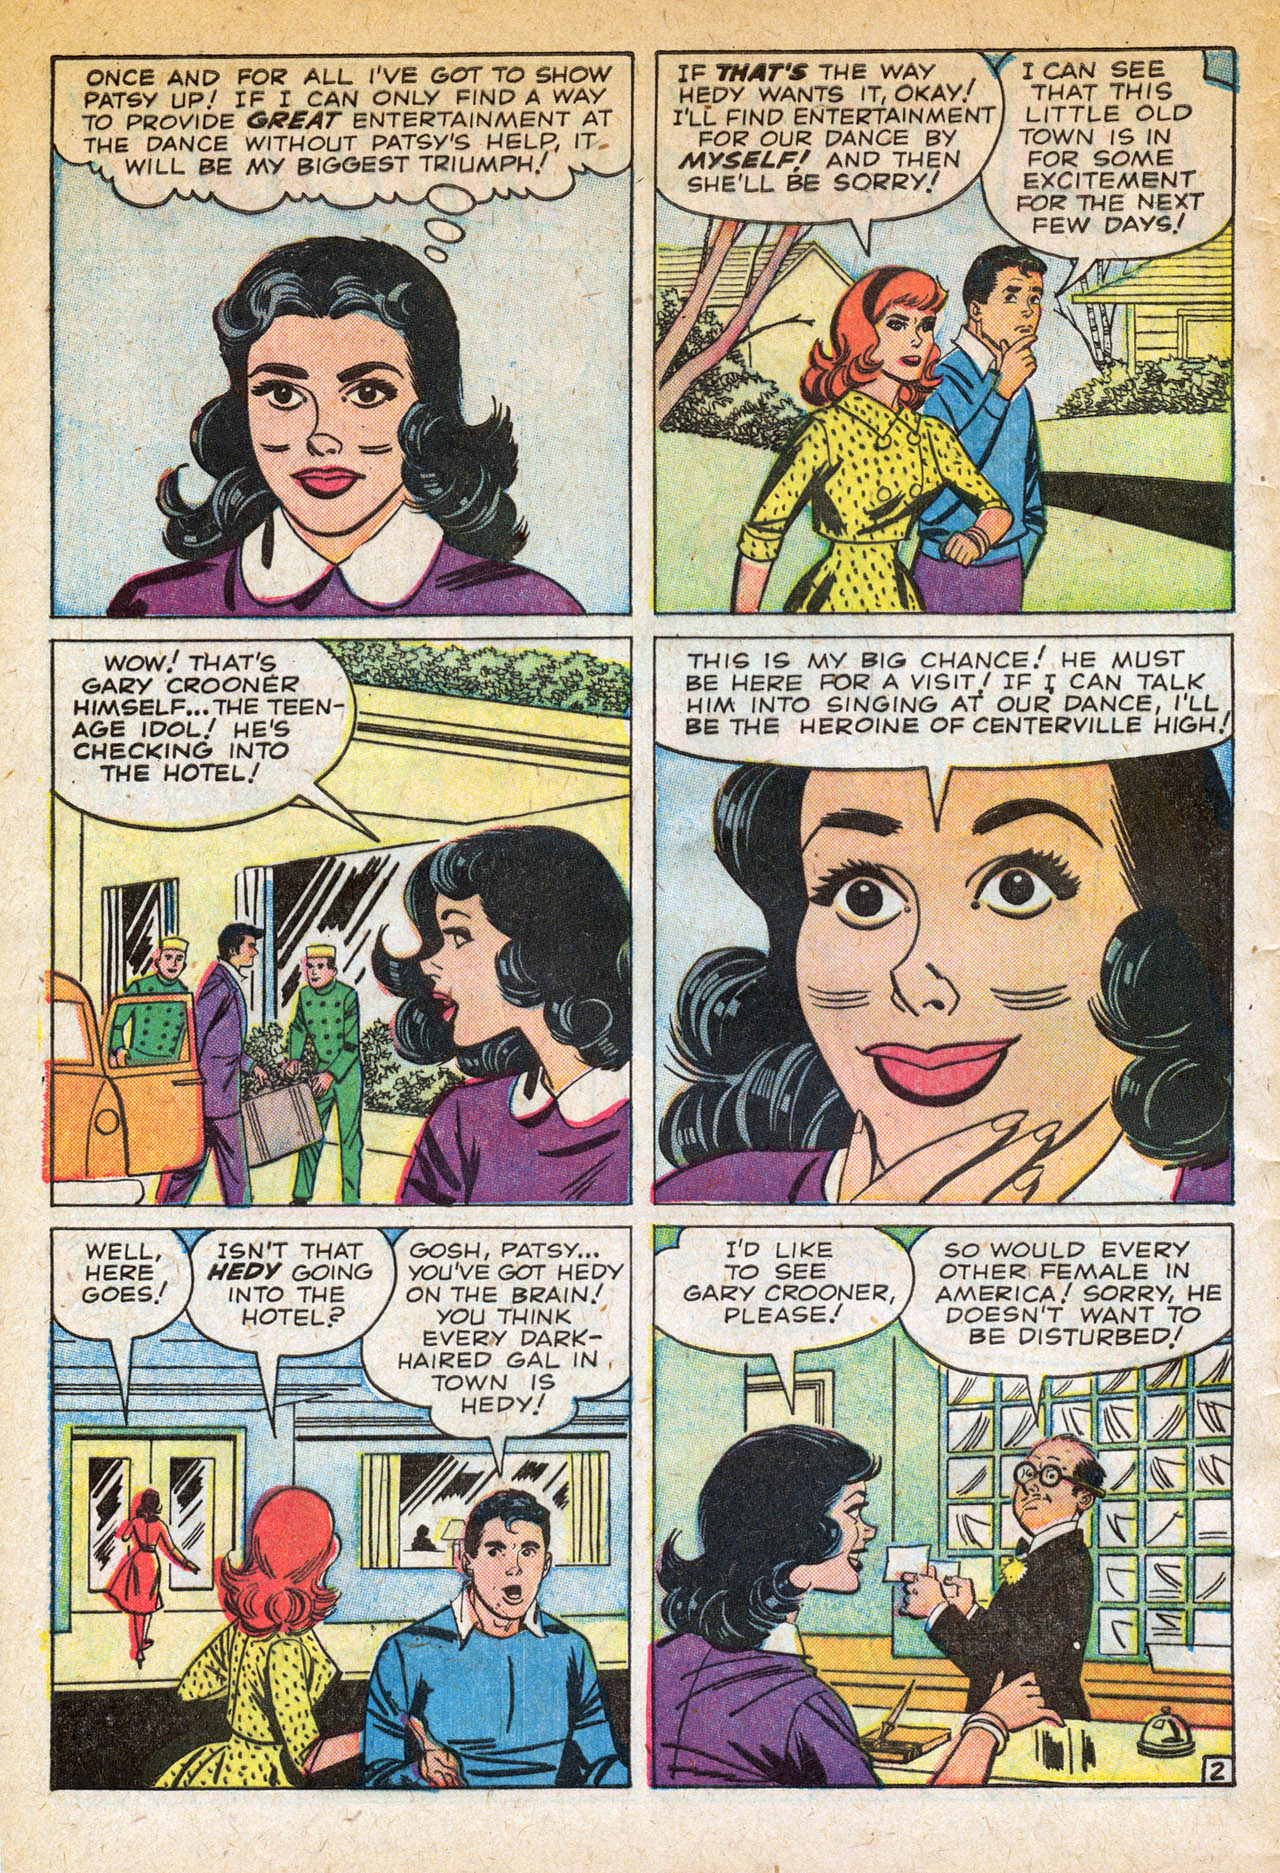 Read online Patsy and Hedy comic -  Issue #65 - 4